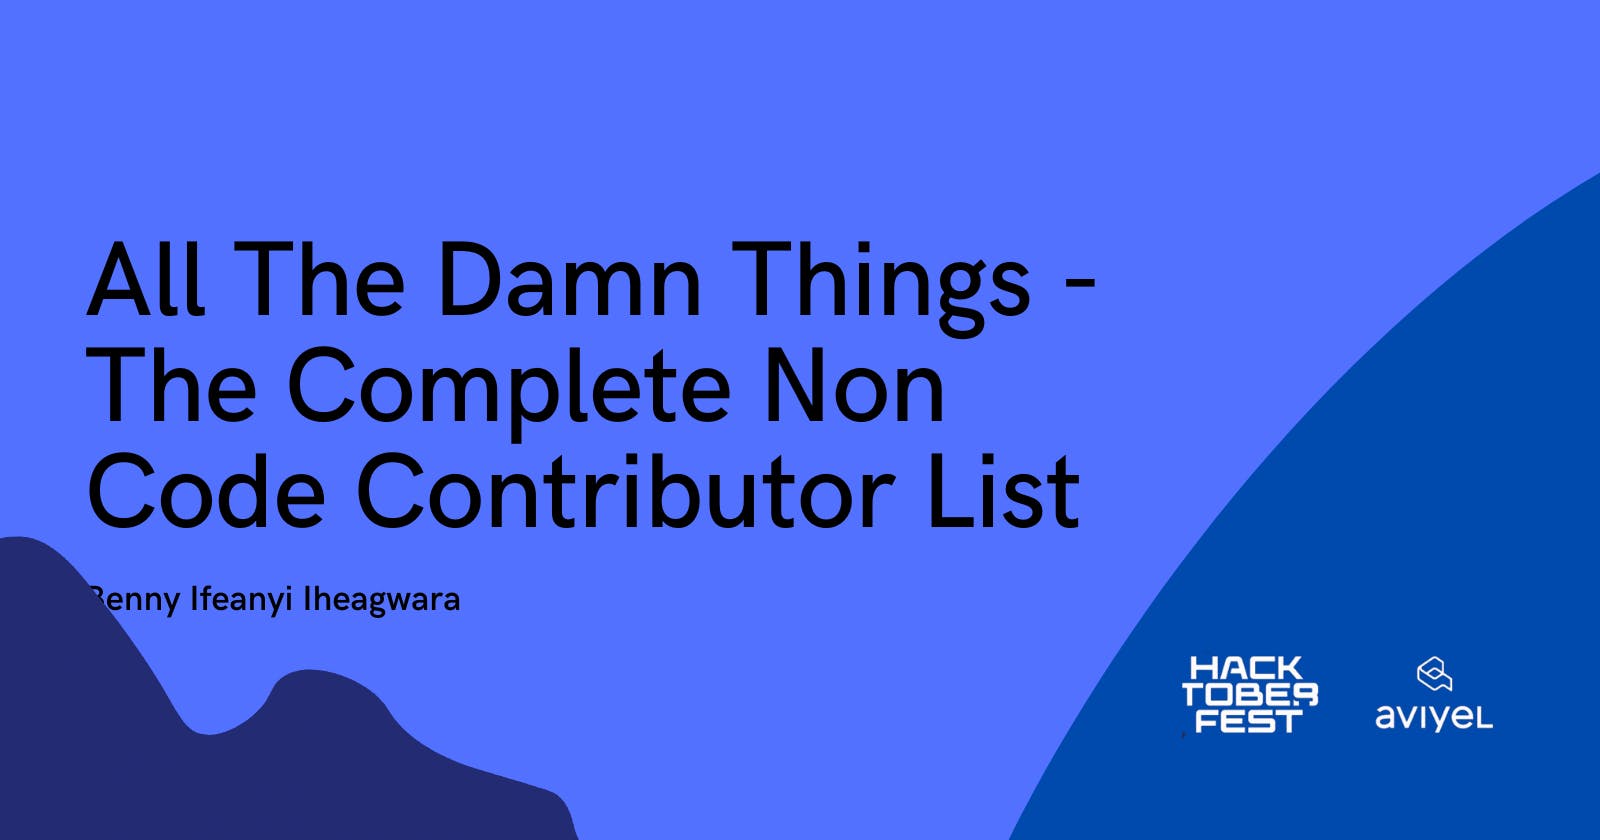 All The Damn Things - The Complete Non Code Contributor List